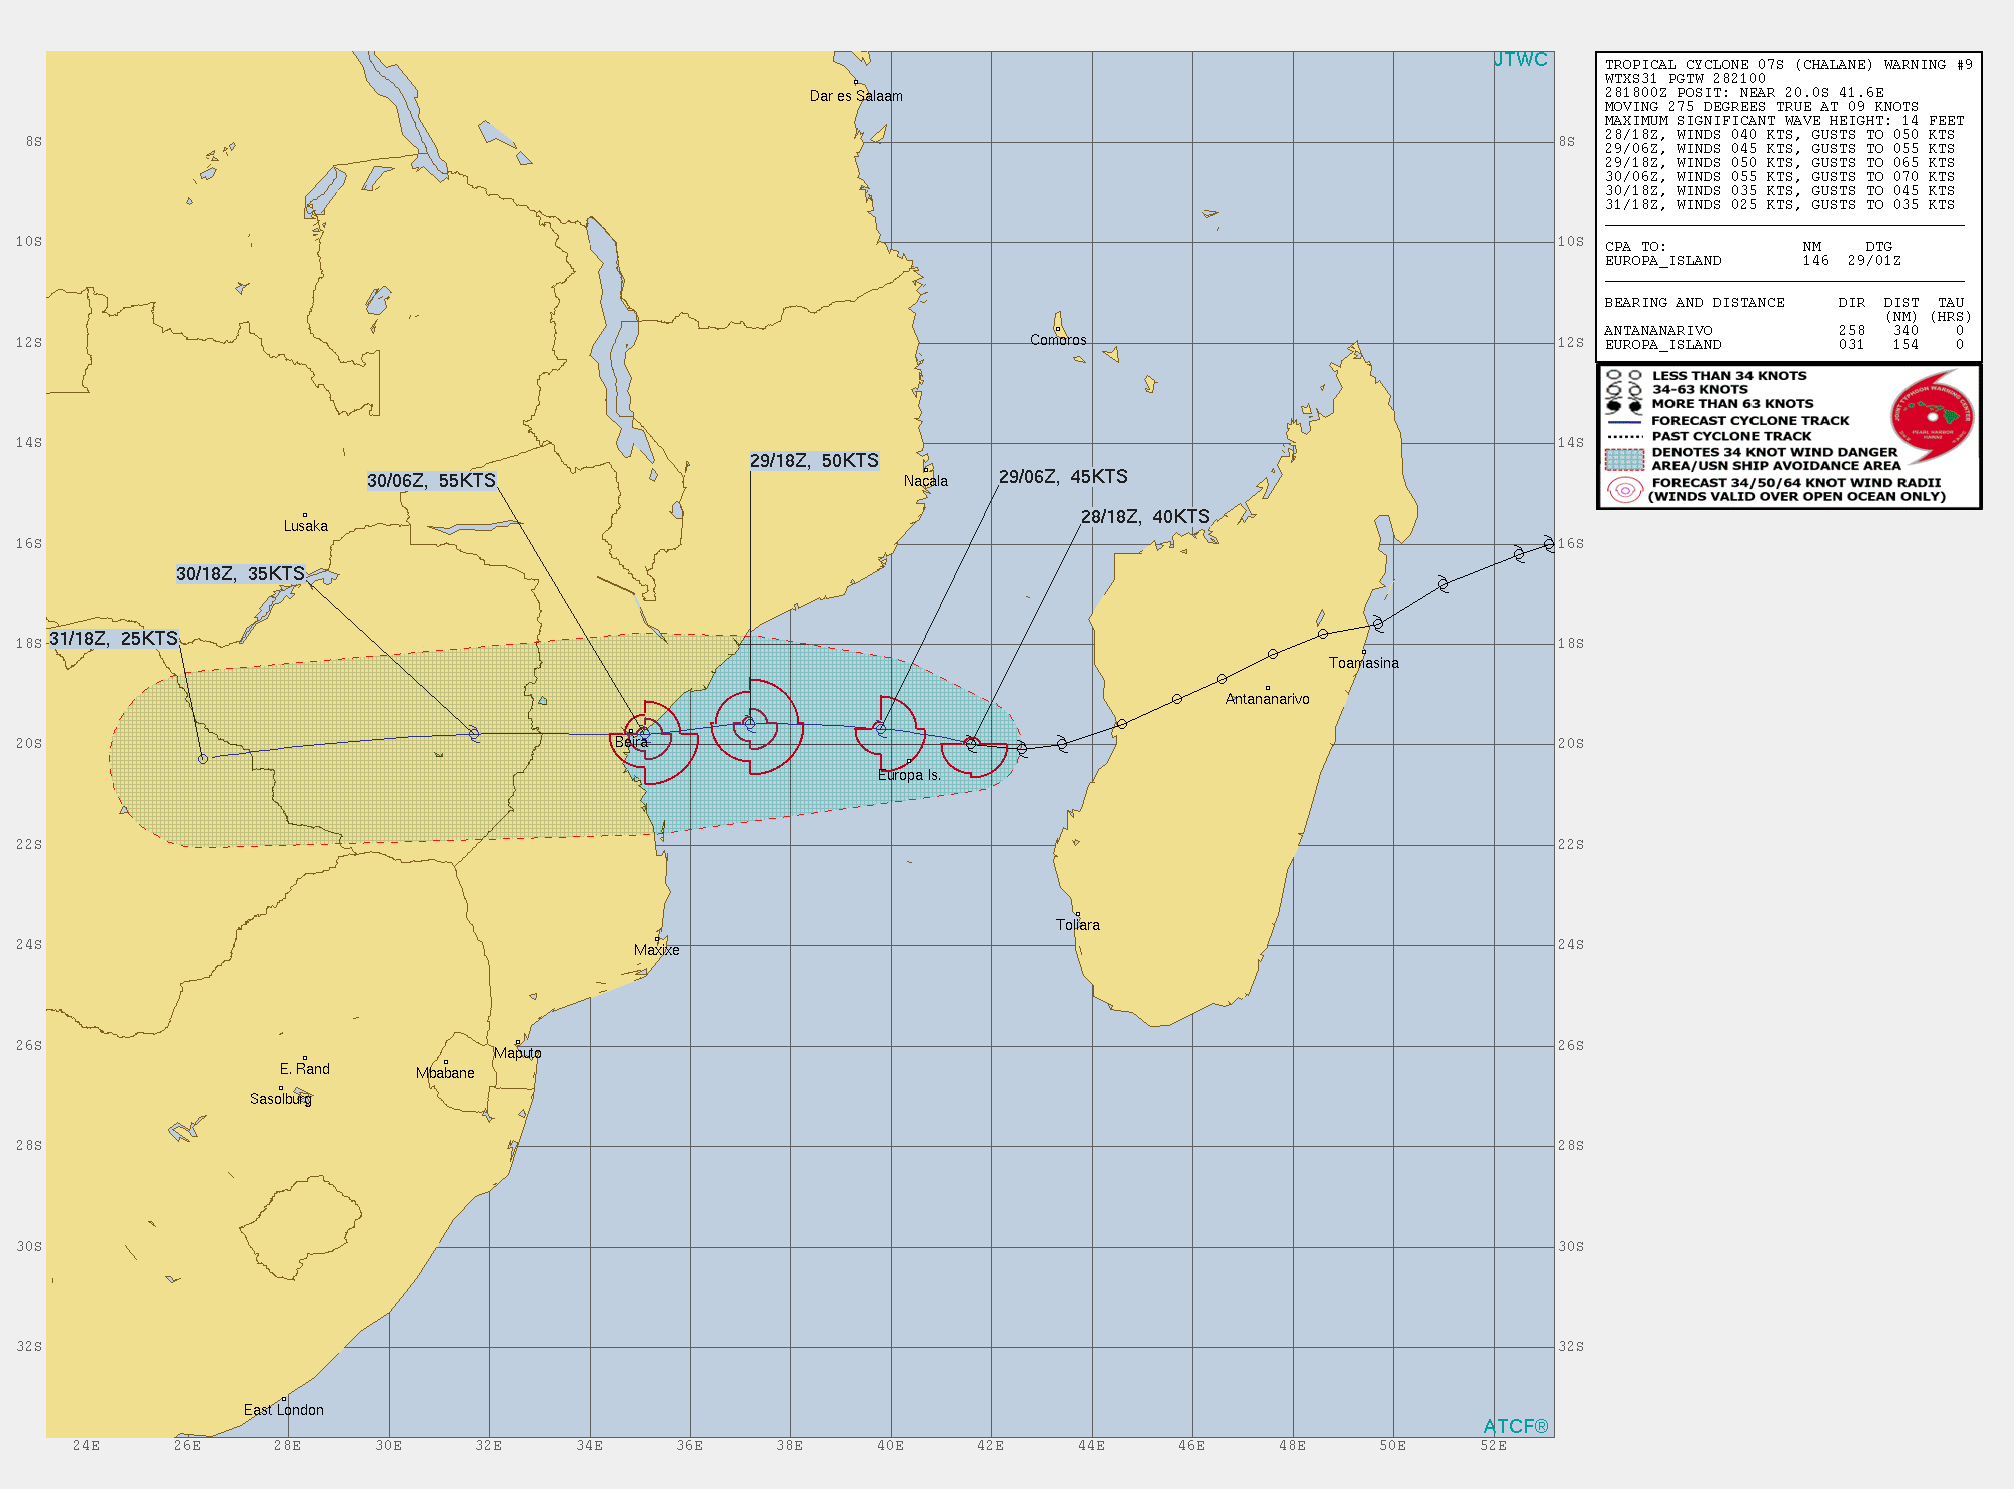 TC 07S(CHALANE) intensifying and slowly approaching Beira/Mozambique, 93S not doing much